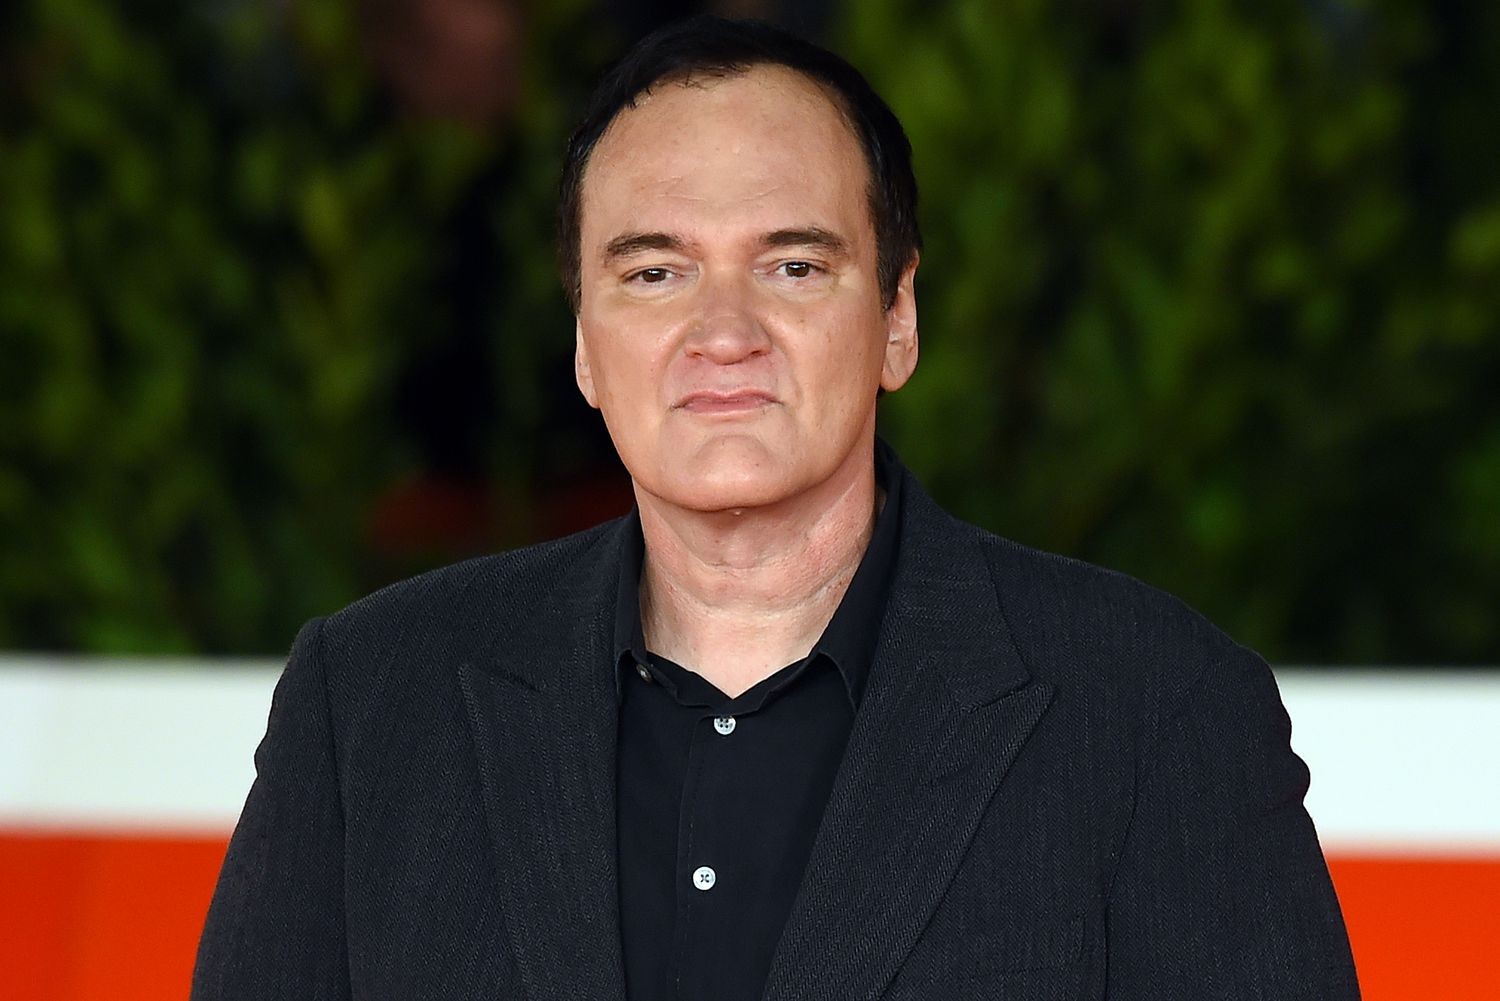 Quentin Tarantino is one of the most influential filmmakers of all time